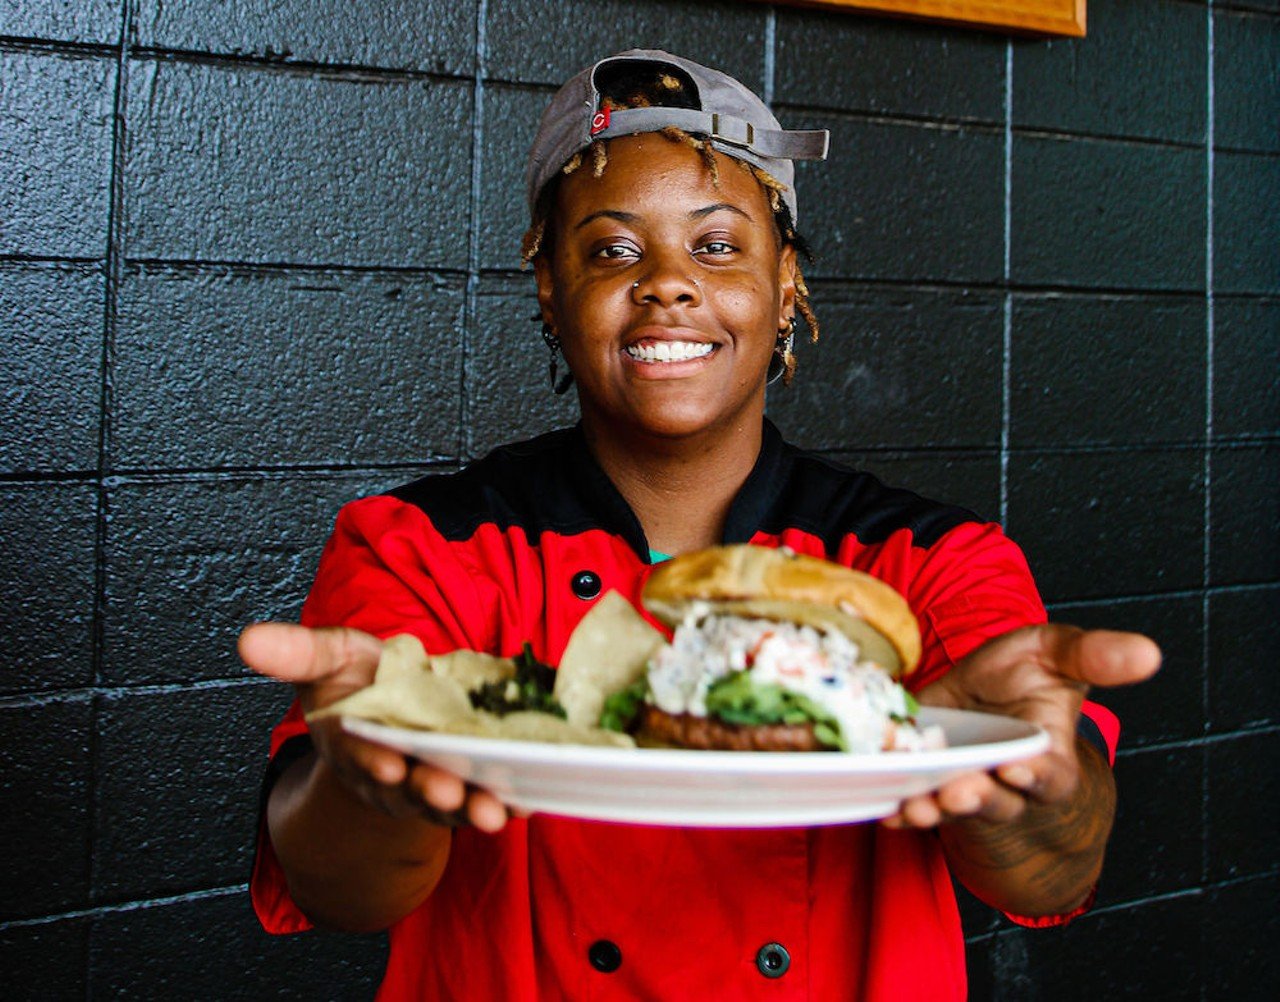 Happy Belly Bistro
1020 E. Washington St.
Ashlee Northington sharpened her utensils in one of Louisville&#146;s most well-known restaurants, Mayan Cafe, and now she&#146;s launched her own venture where she makes fusion dishes with ambitious flavors. Currently stationed at TEN20 Brewery in Butchertown, Northington swaps out her curated menu often but there are customer favorites that stay, such as her Old Town Road nachos with chipotle aioli, fried kale, braised chicken, quest fresco, black beans and corn pico piled onto fresh fried tortilla ships.
Photo by Jess Amburgey